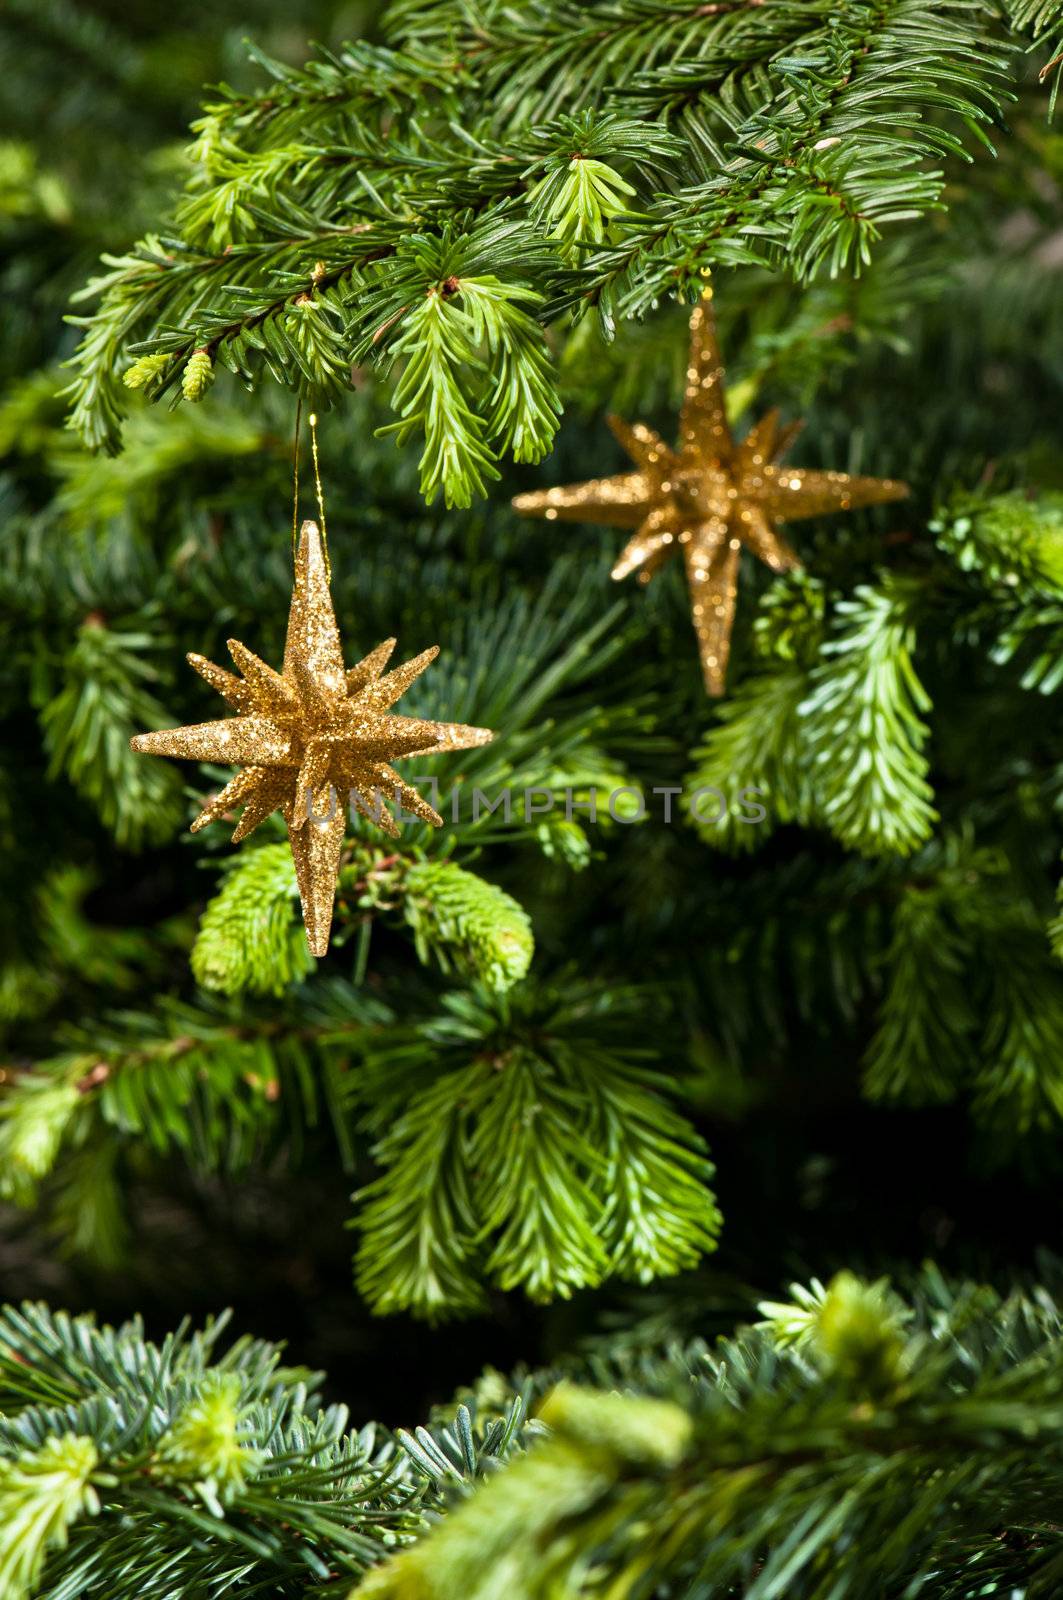 Star shape Christmas ornament, gold in color, in fresh green Christmas tree